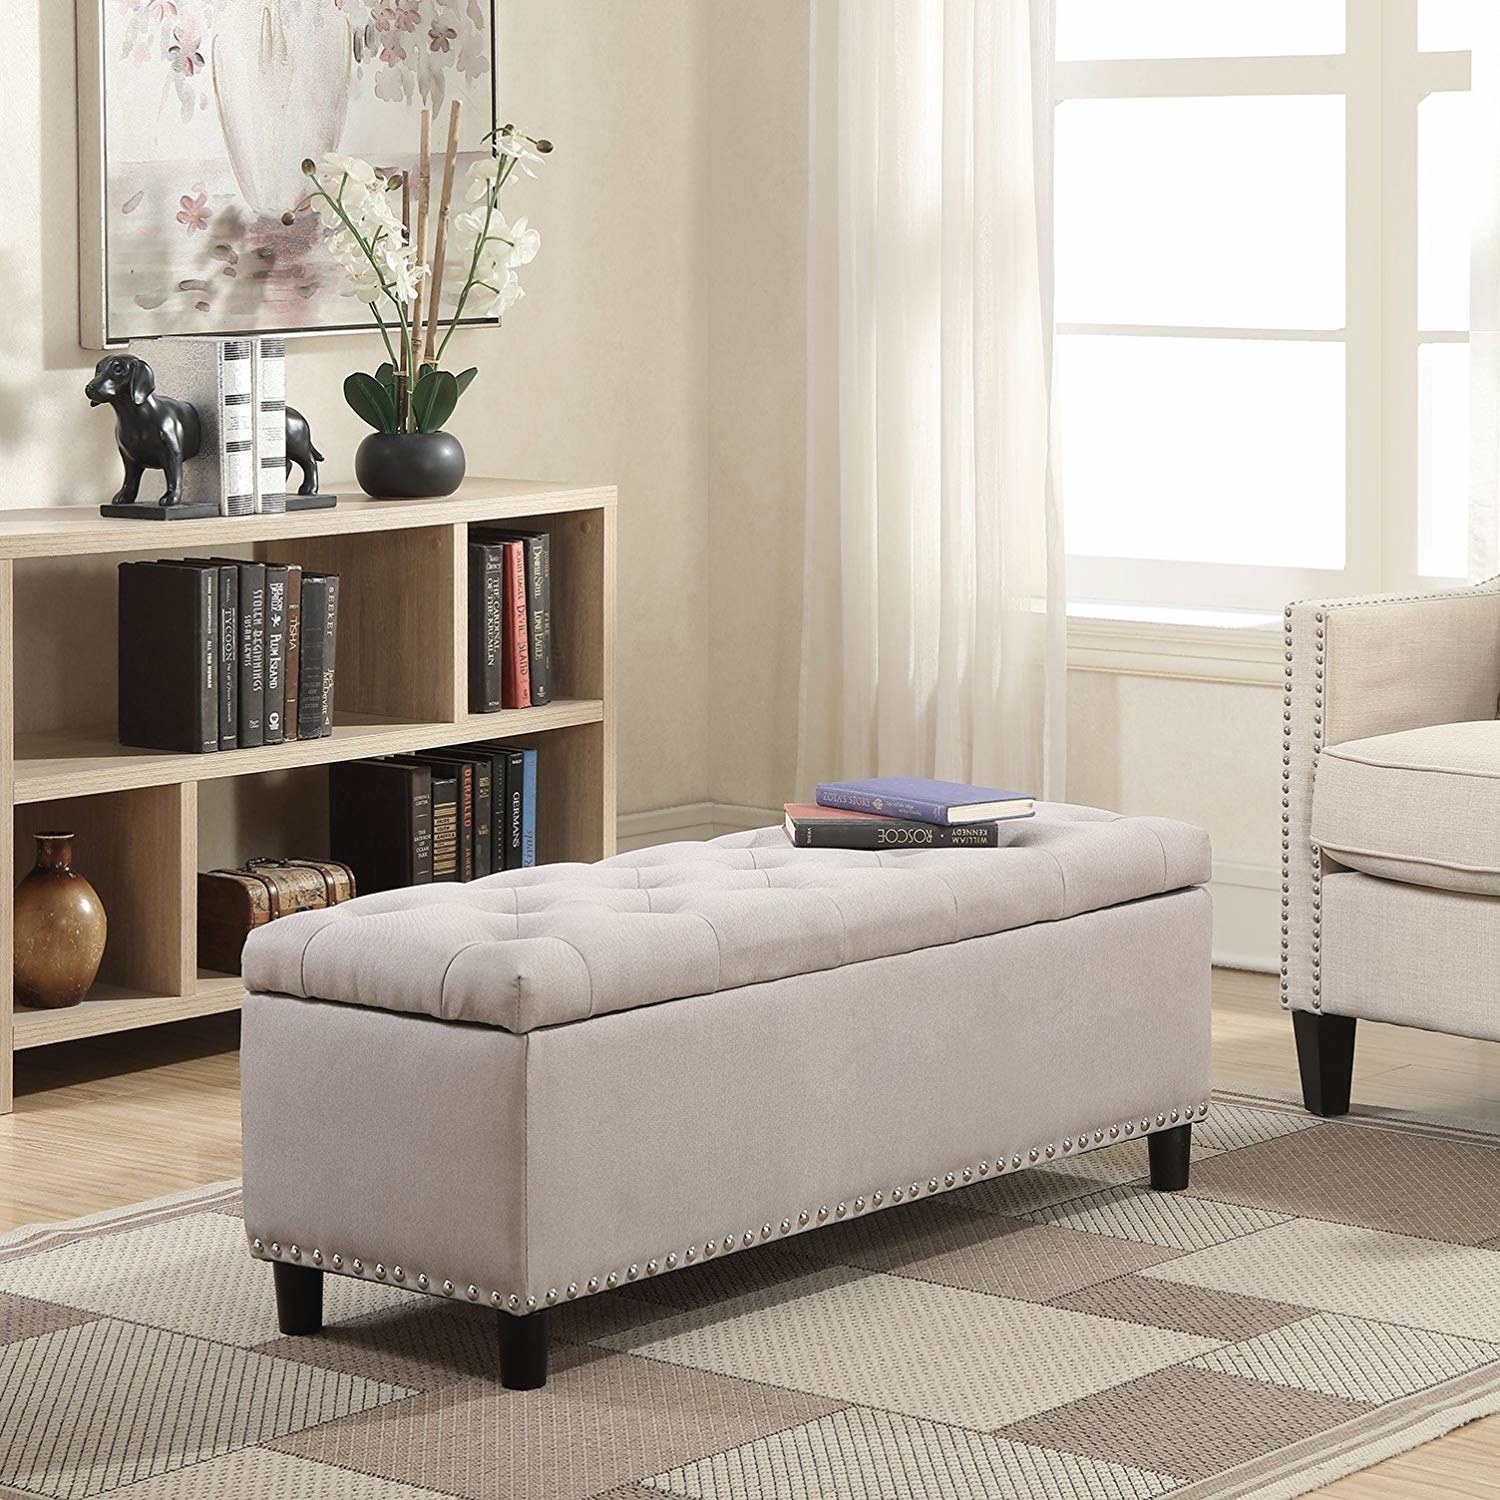 The grey fabric ottoman bench with silver studs on the bottom